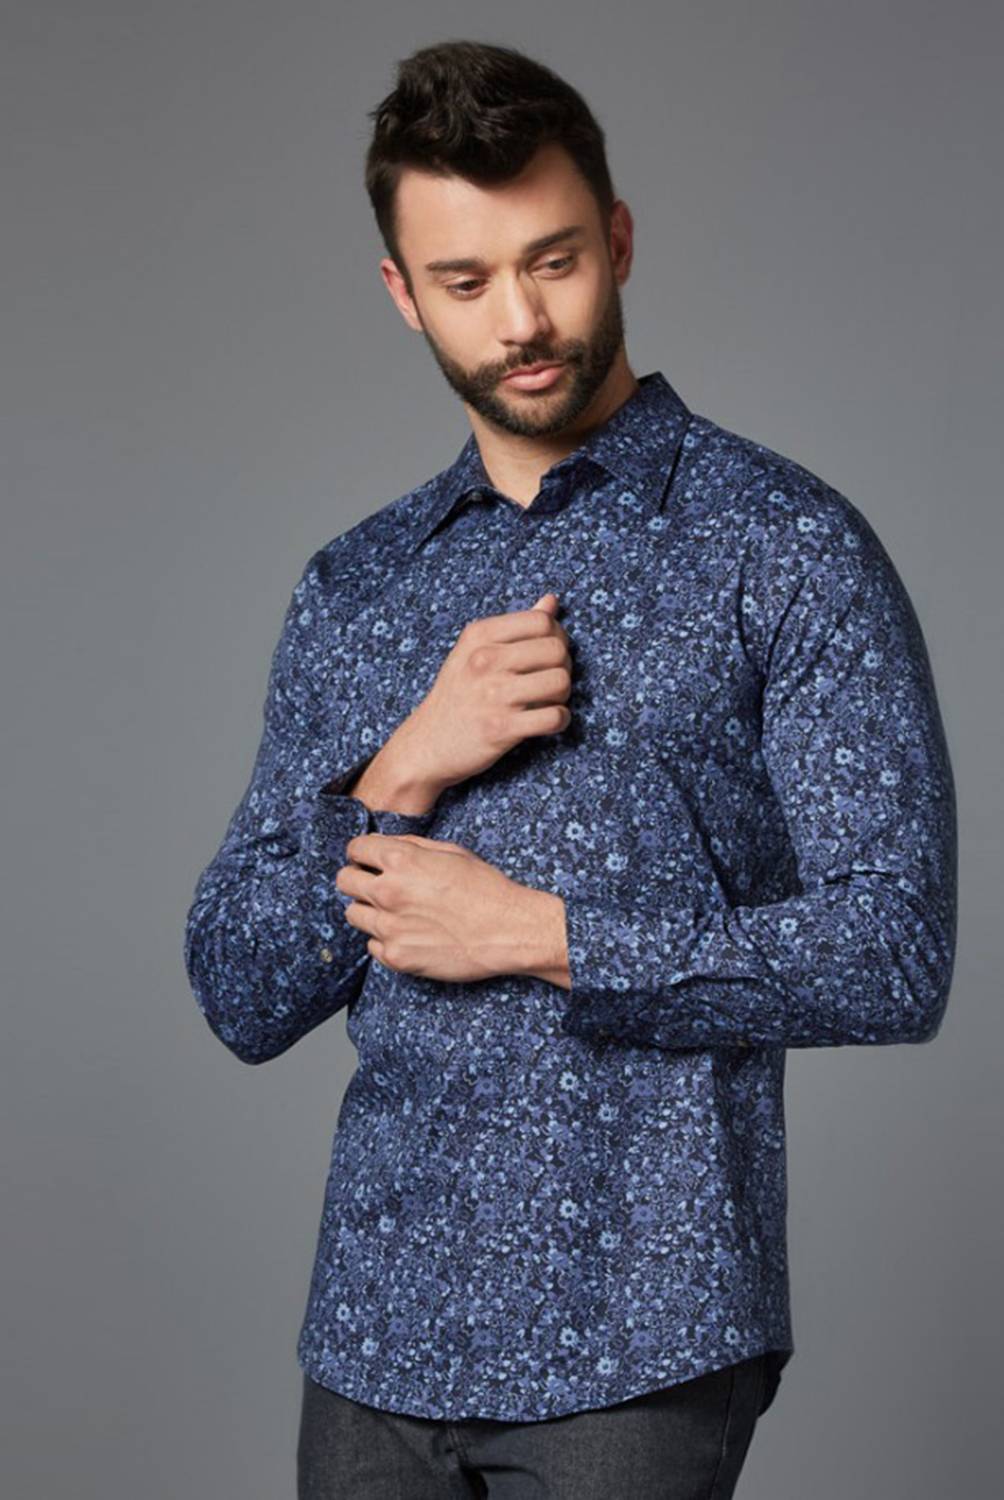 PERRY ELLIS - Casual Shirt Collection